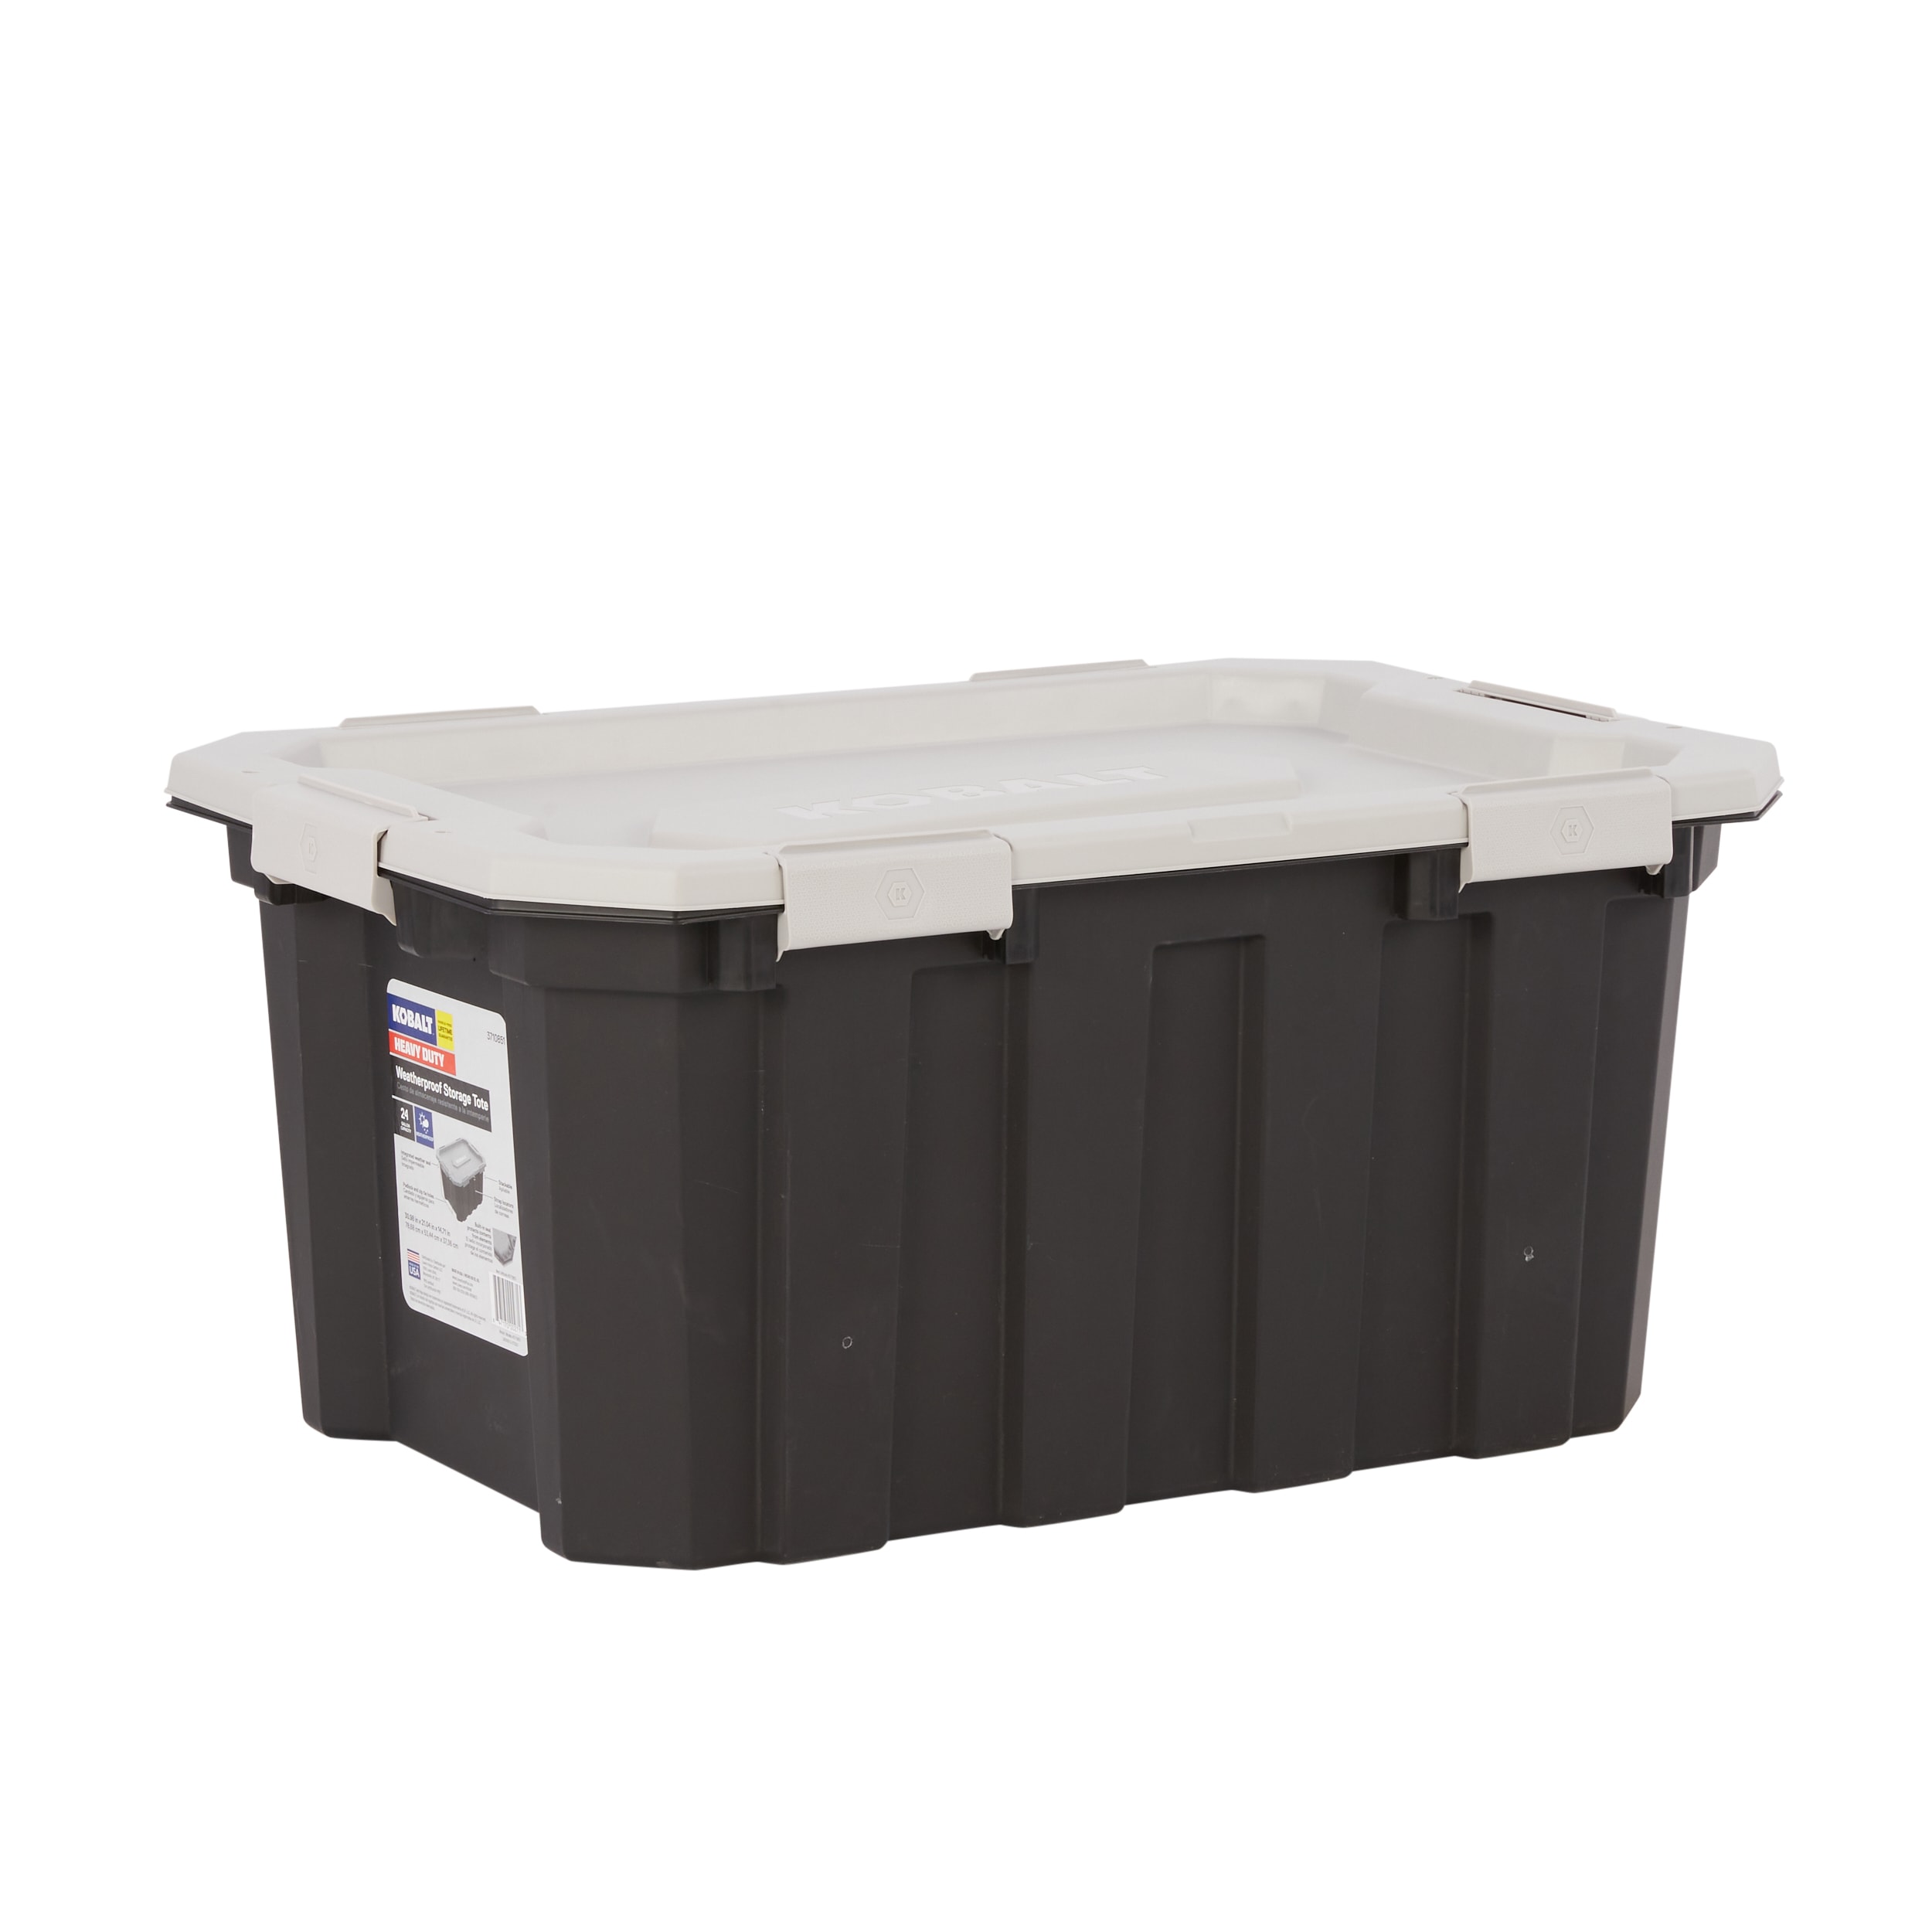 Latching Plastic Storage Containers at